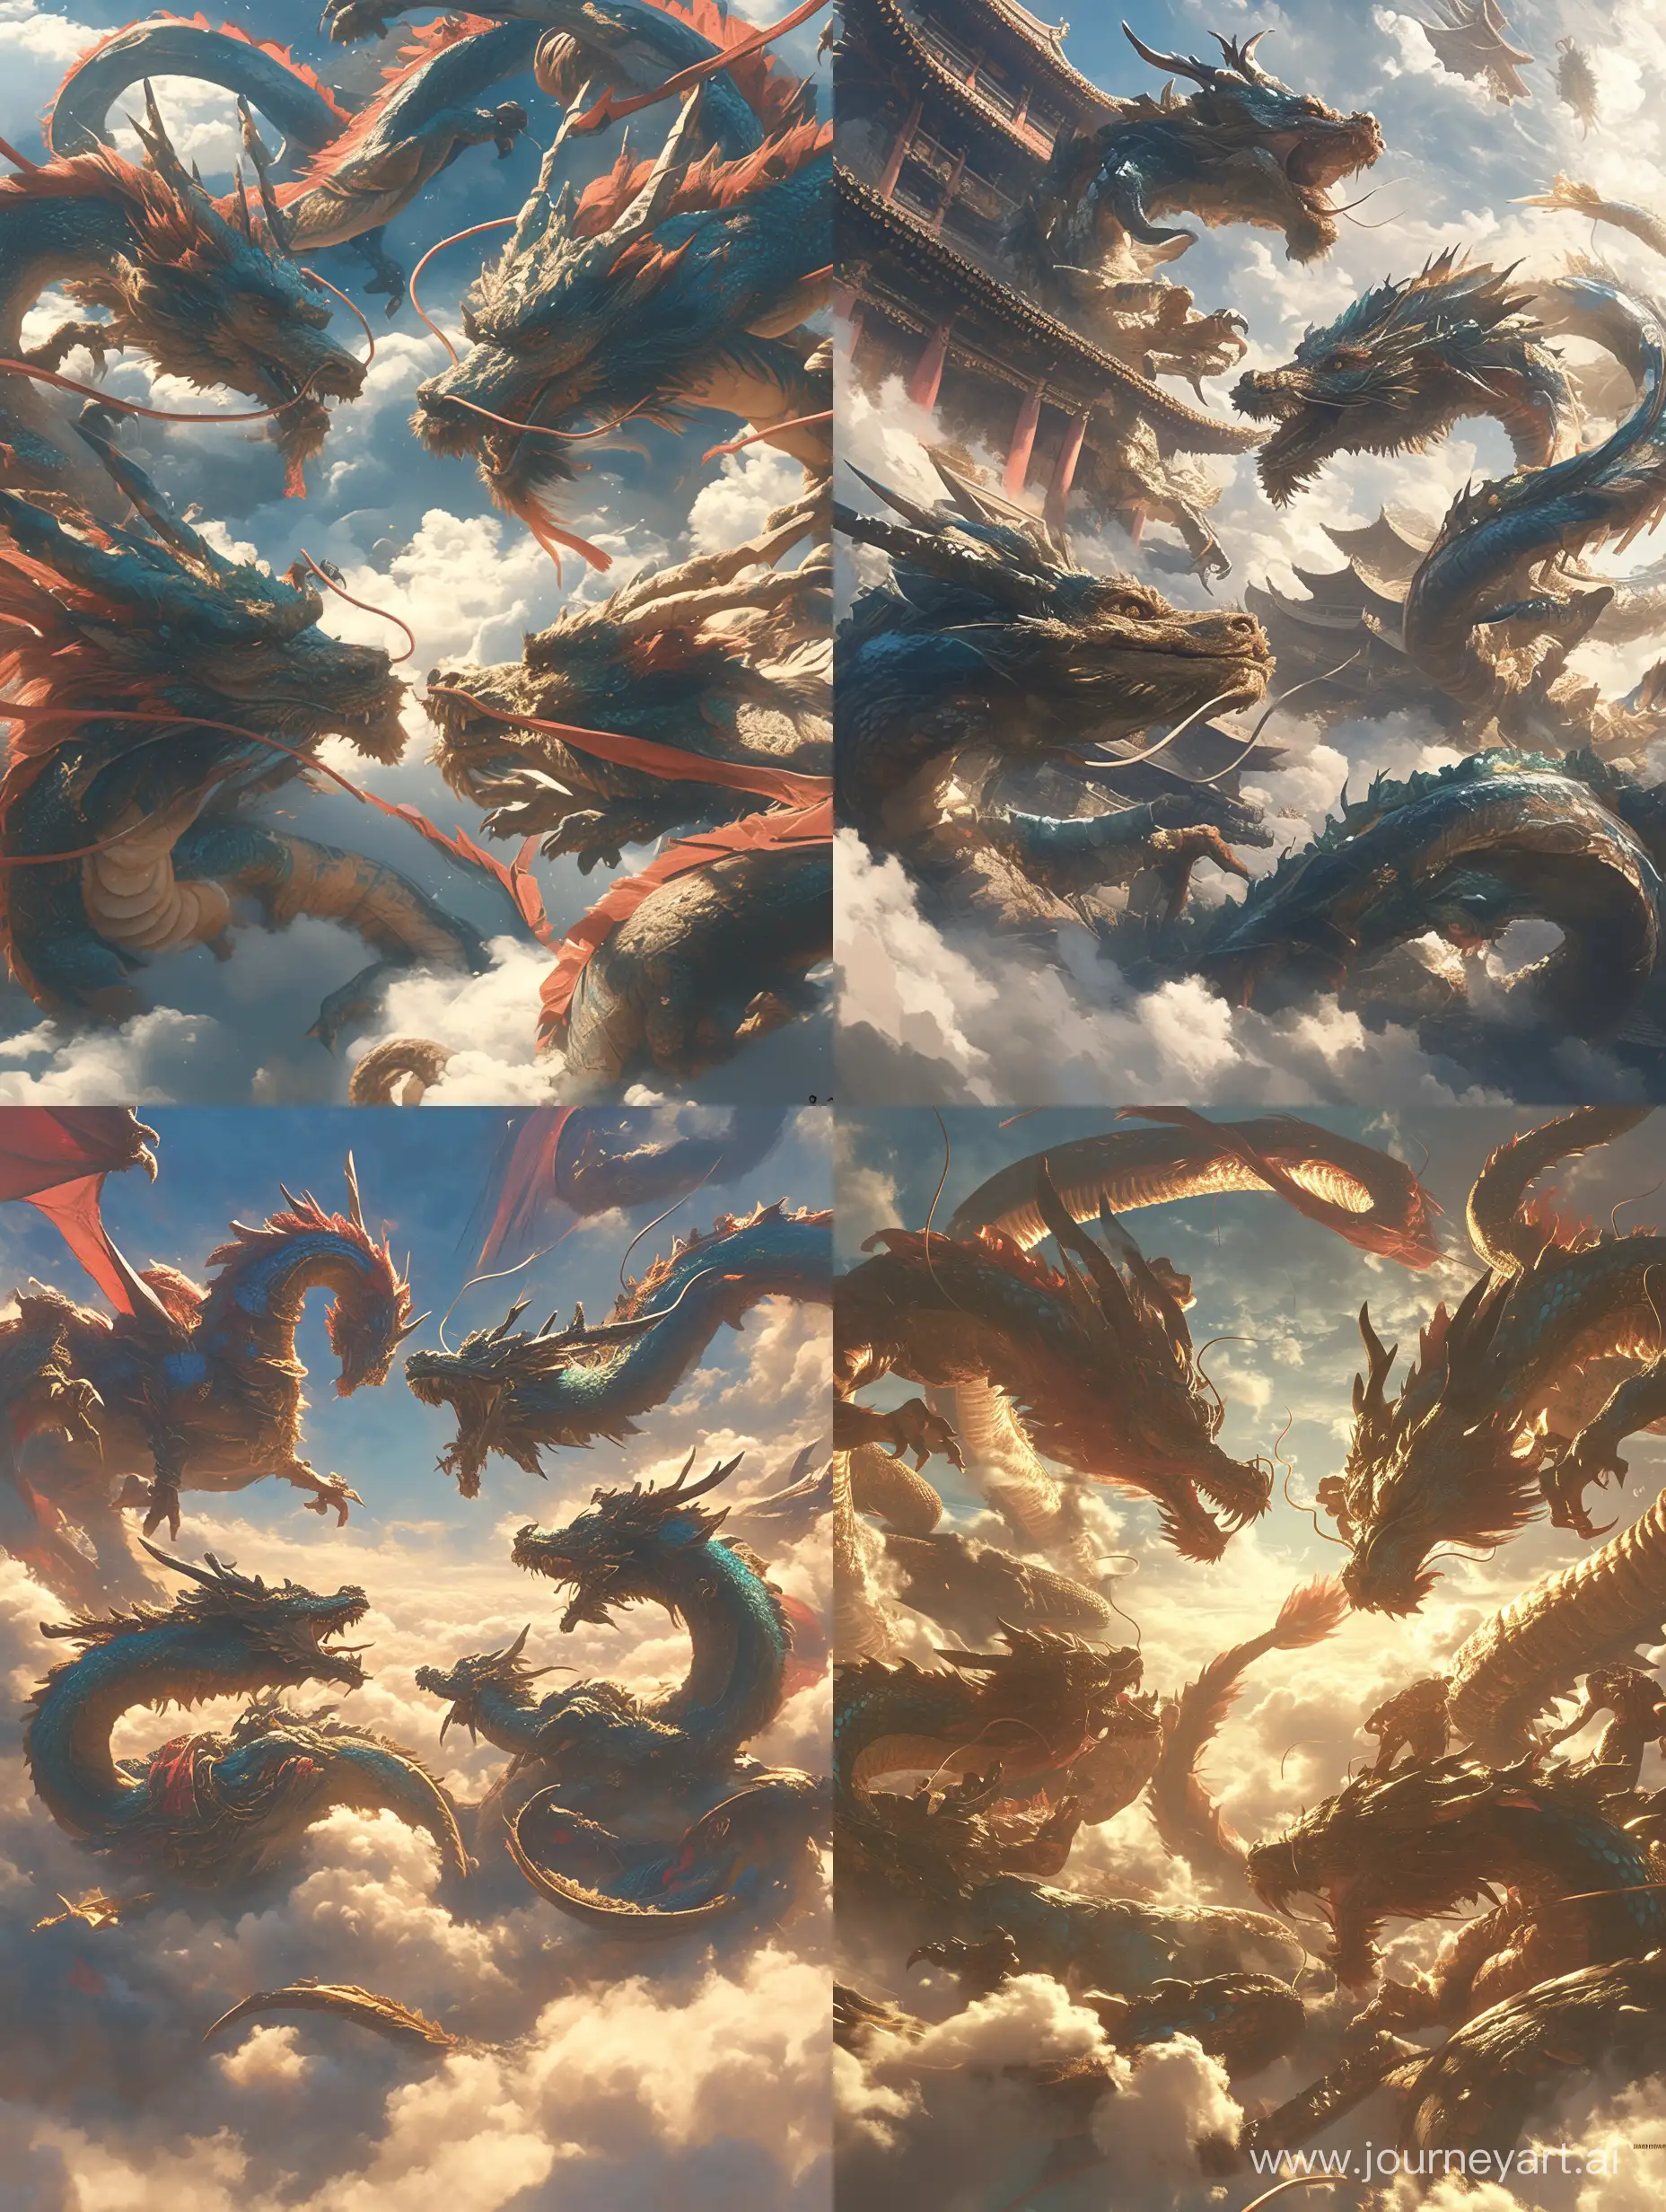 Epic-Battle-of-Four-Dragons-in-AsianInspired-Cloudscape